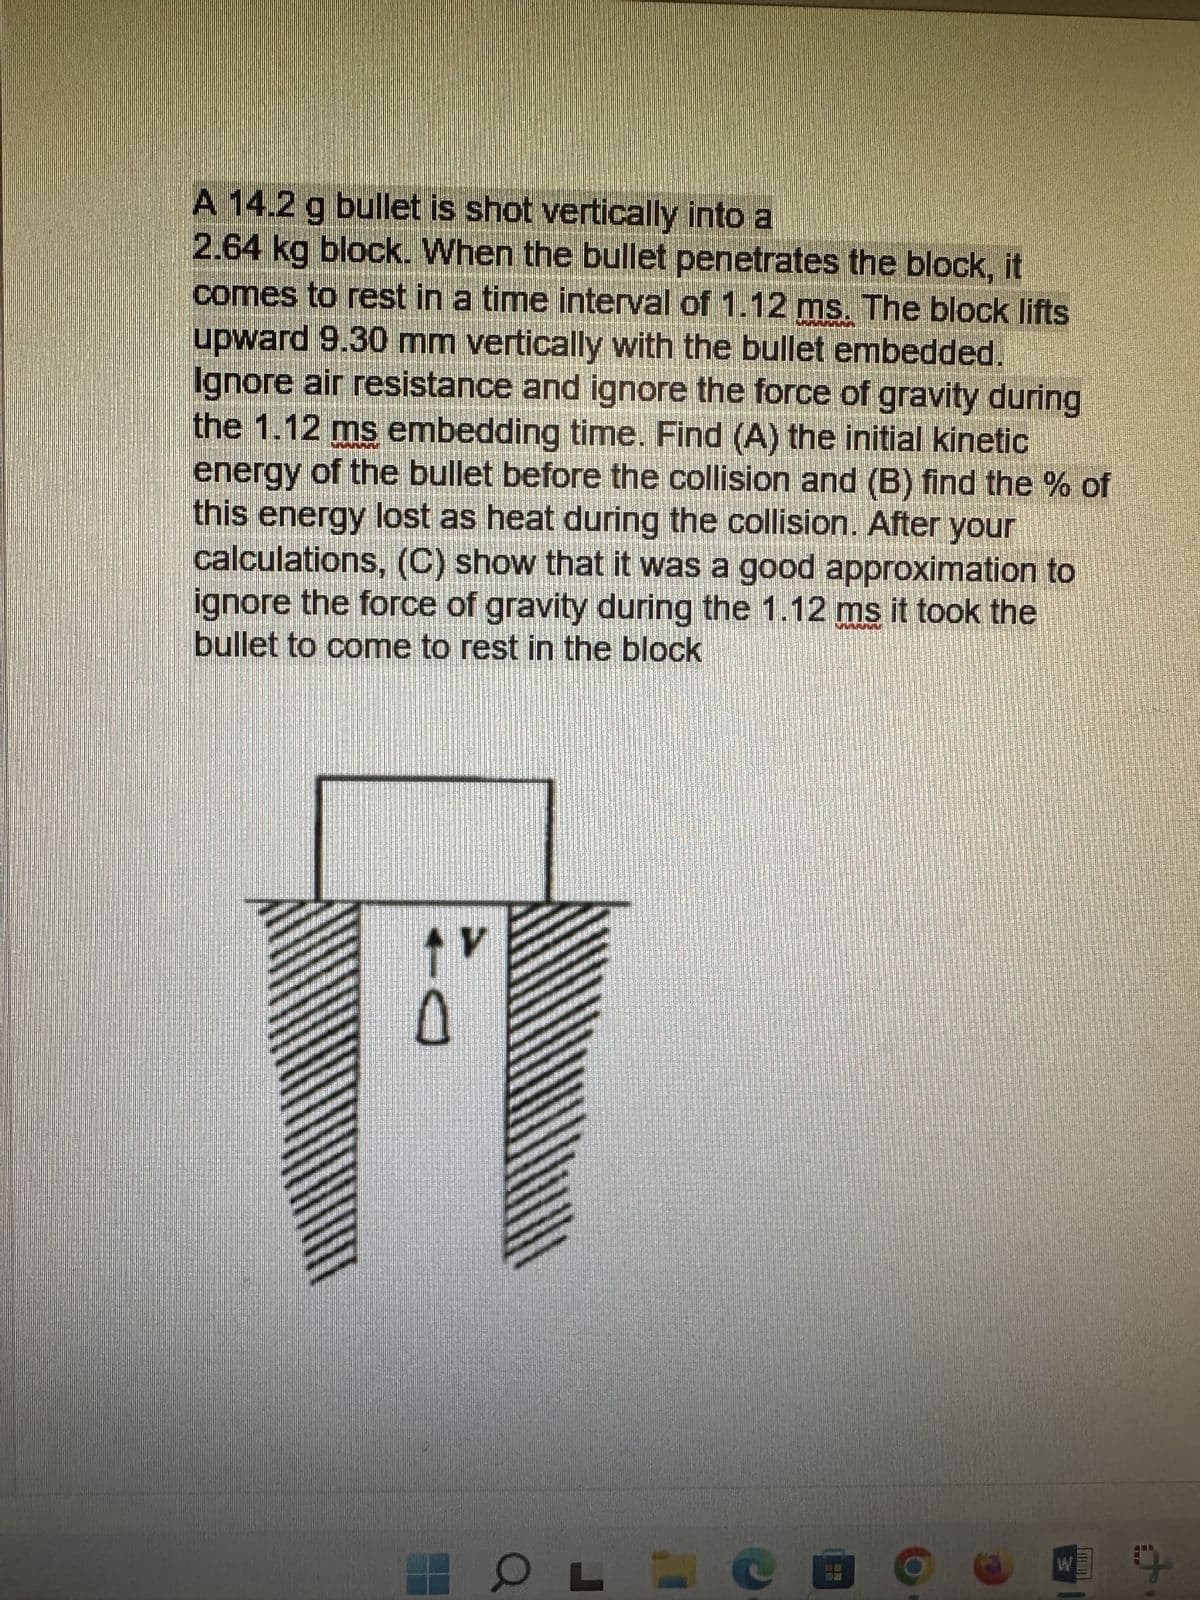 A 14.2 g bullet is shot vertically into a
2.64 kg block. When the bullet penetrates the block, it
comes to rest in a time interval of 1.12 ms. The block lifts
upward 9.30 mm vertically with the bullet embedded.
Ignore air resistance and ignore the force of gravity during
the 1.12 ms embedding time. Find (A) the initial kinetic
energy of the bullet before the collision and (B) find the % of
this energy lost as heat during the collision. After your
calculations, (C) show that it was a good approximation to
ignore the force of gravity during the 1.12 ms it took the
bullet to come to rest in the block
V
60
WI
An
9